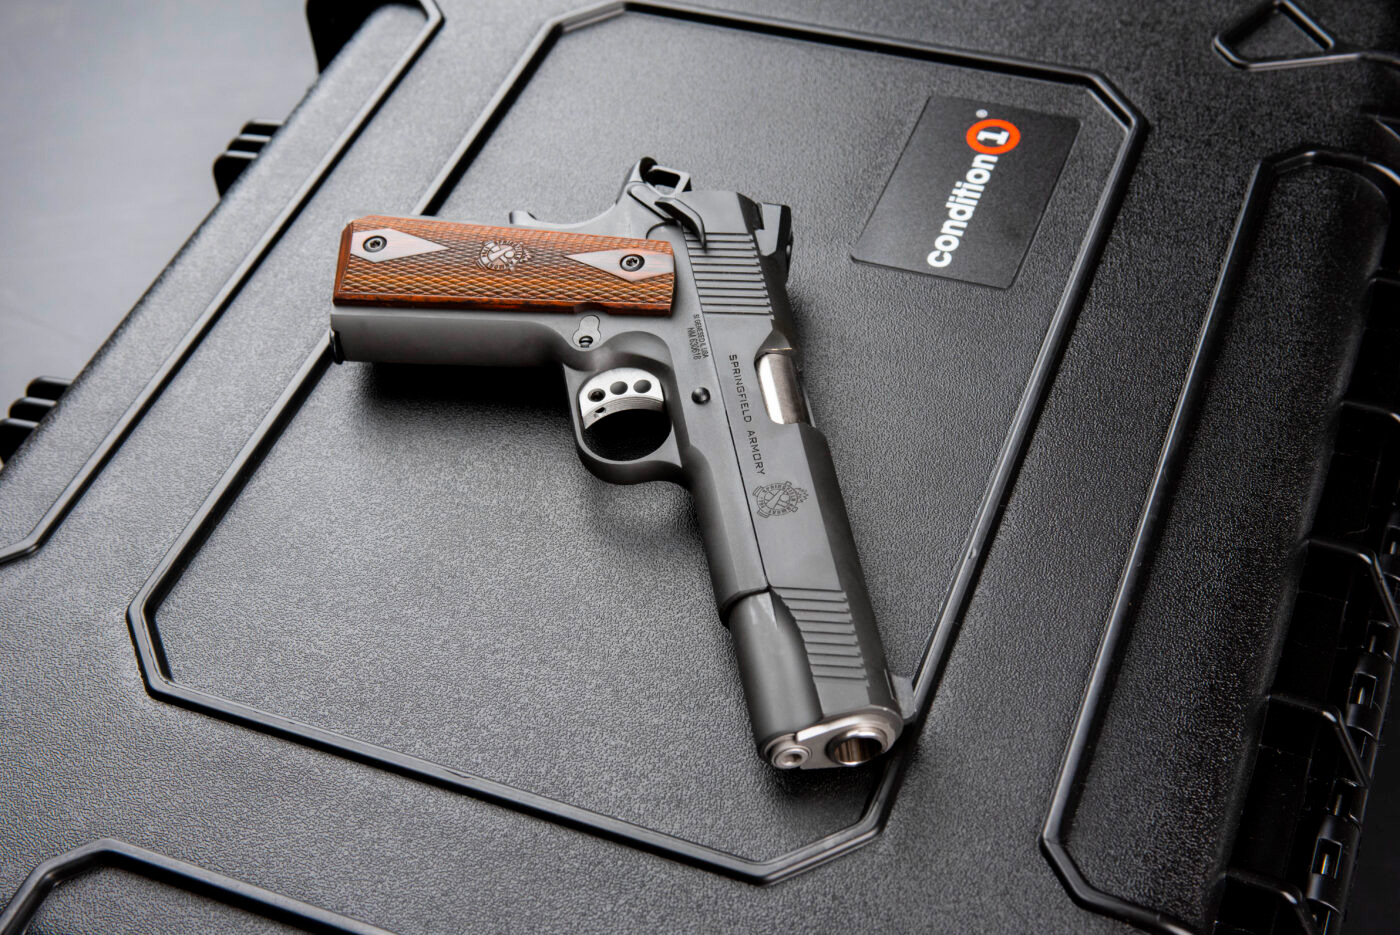 Springfield Armory Garrison 1911 pistol on top of carrying case